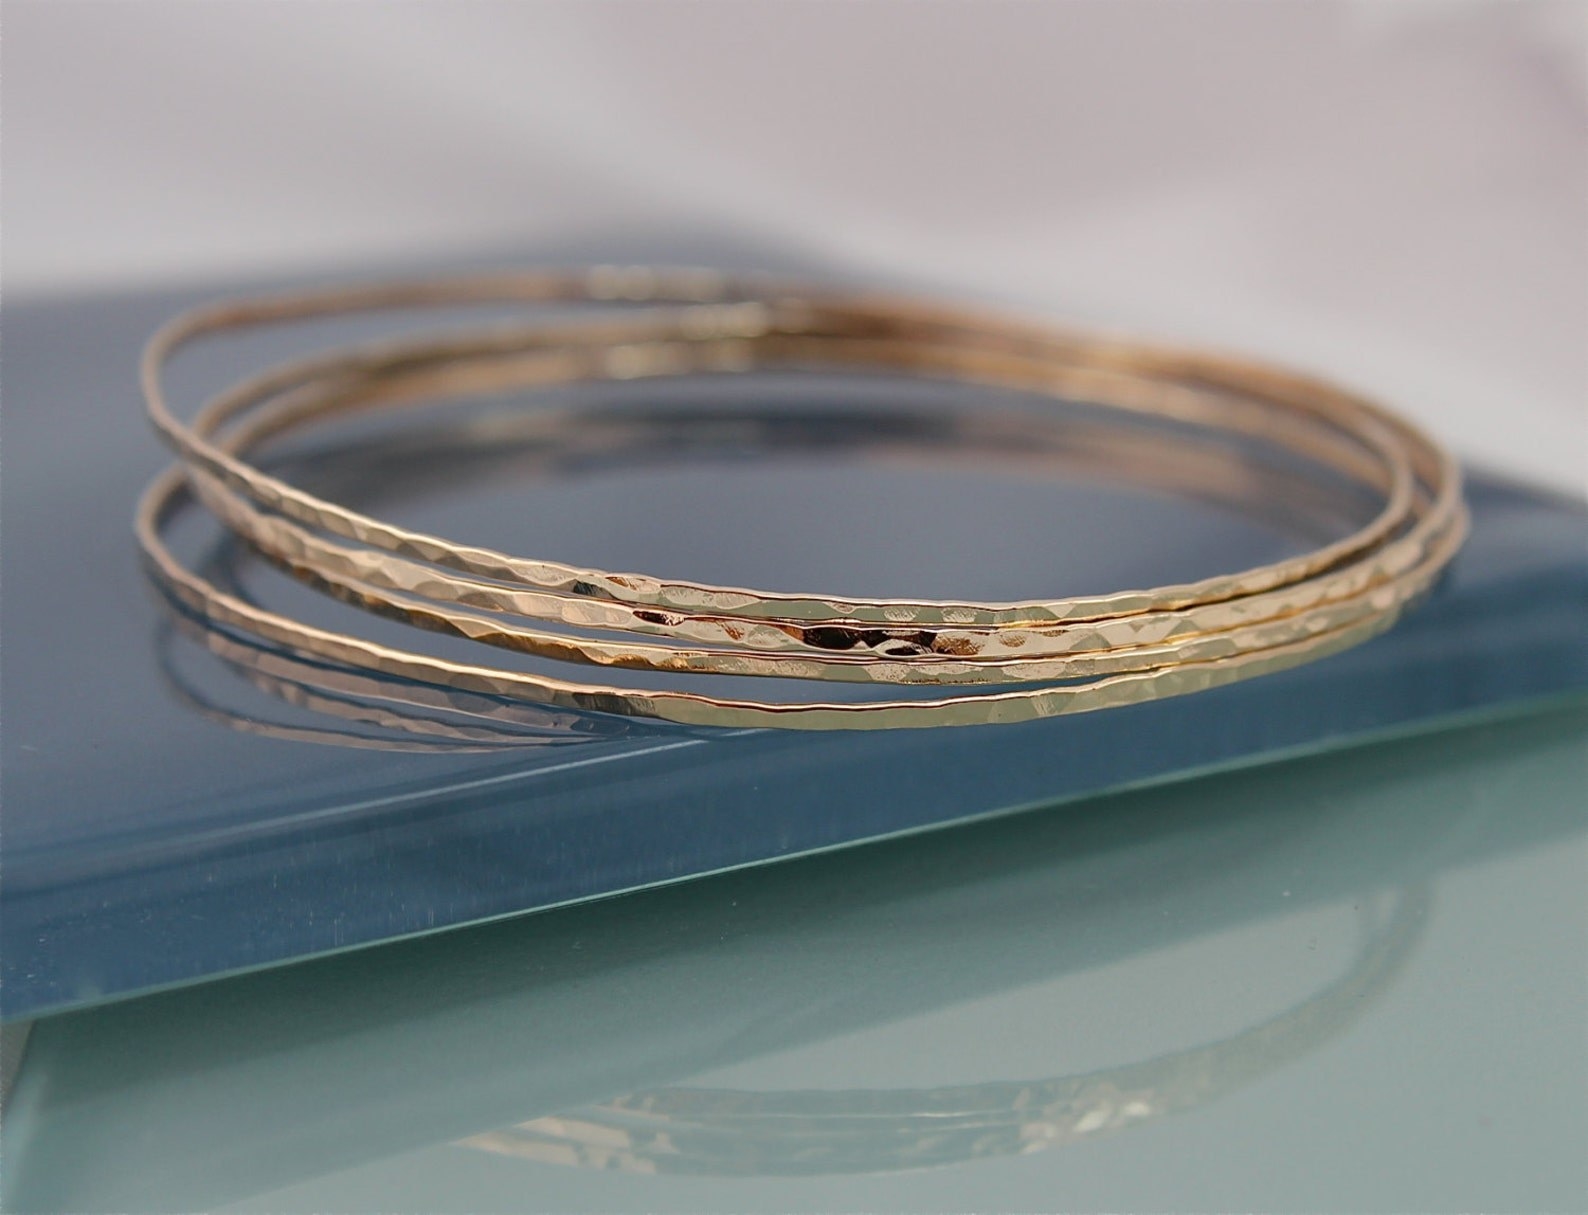 A set of four golden bangles with a hammered texture.